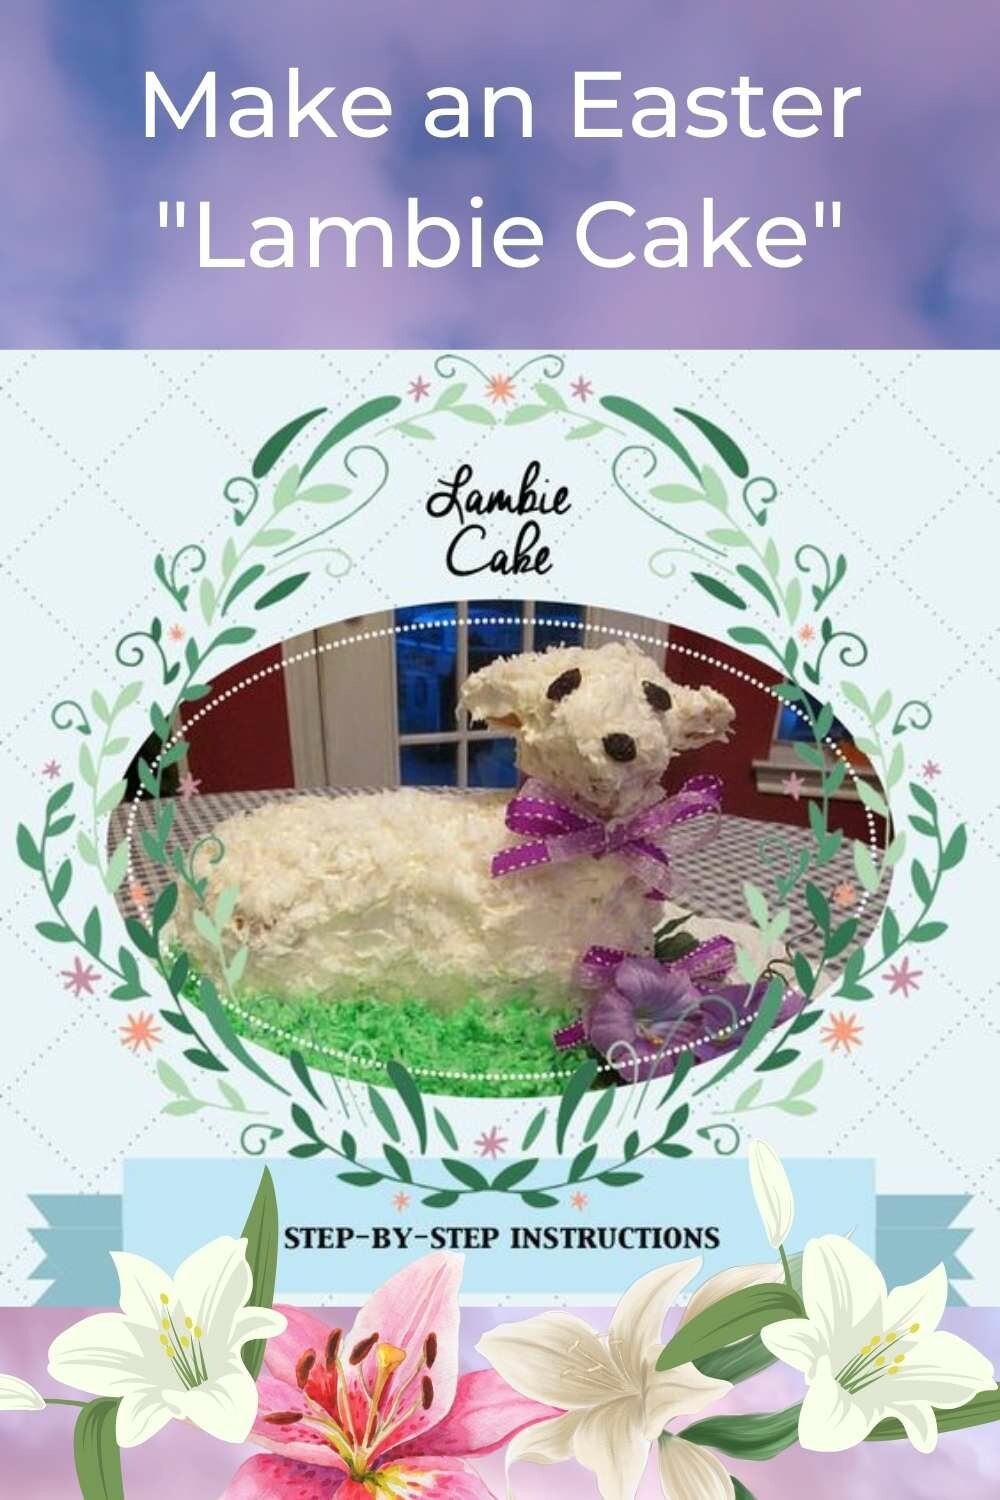 How to Make a Lambie Cake for Easter